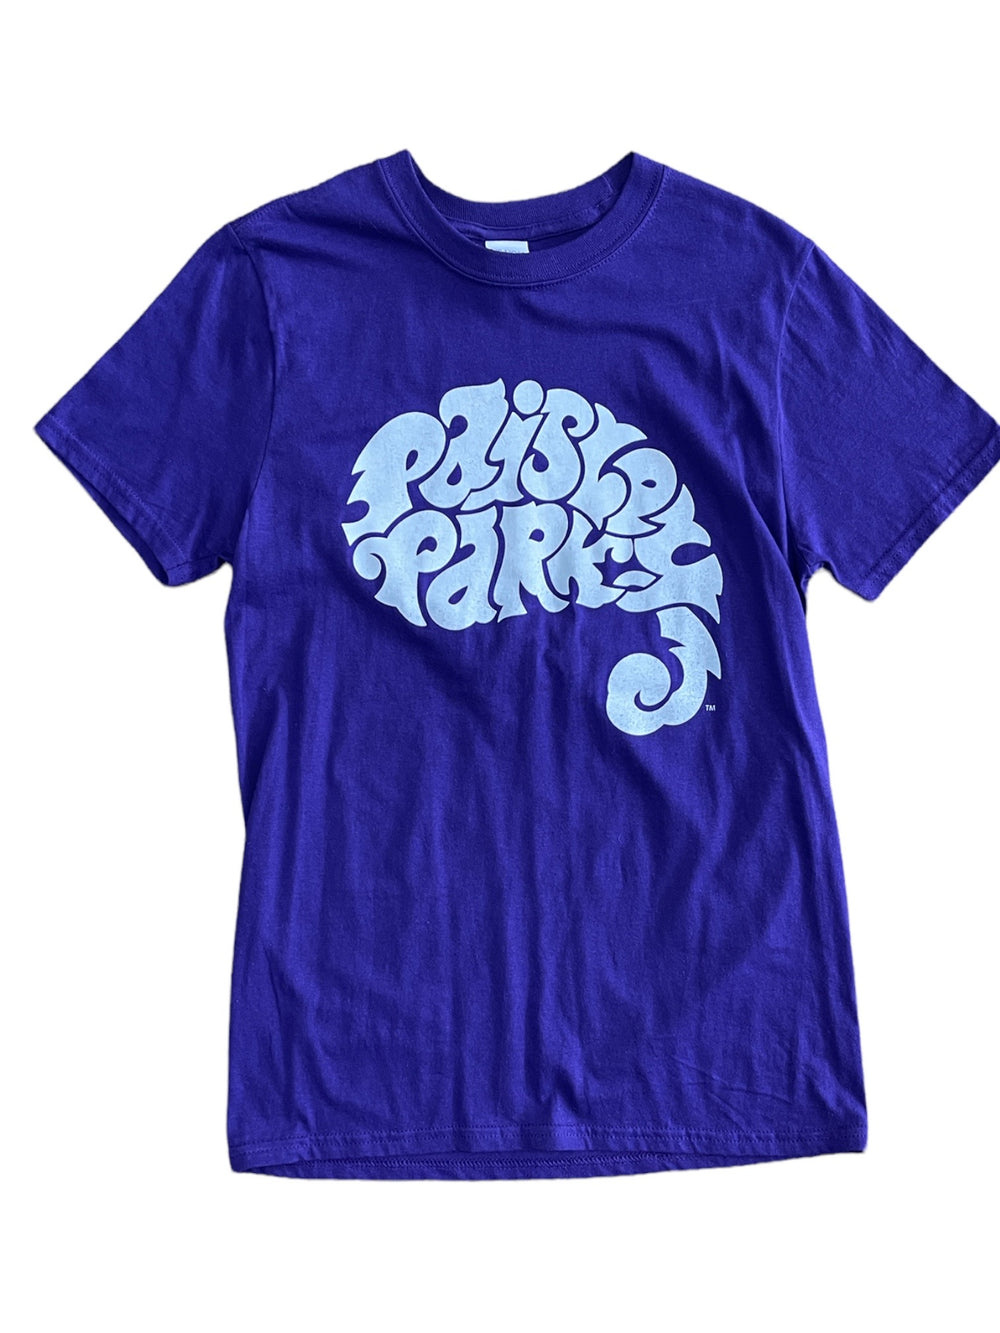 Prince – Paisley Park Official Logo Unisex Official T Shirt Brand New Size Small